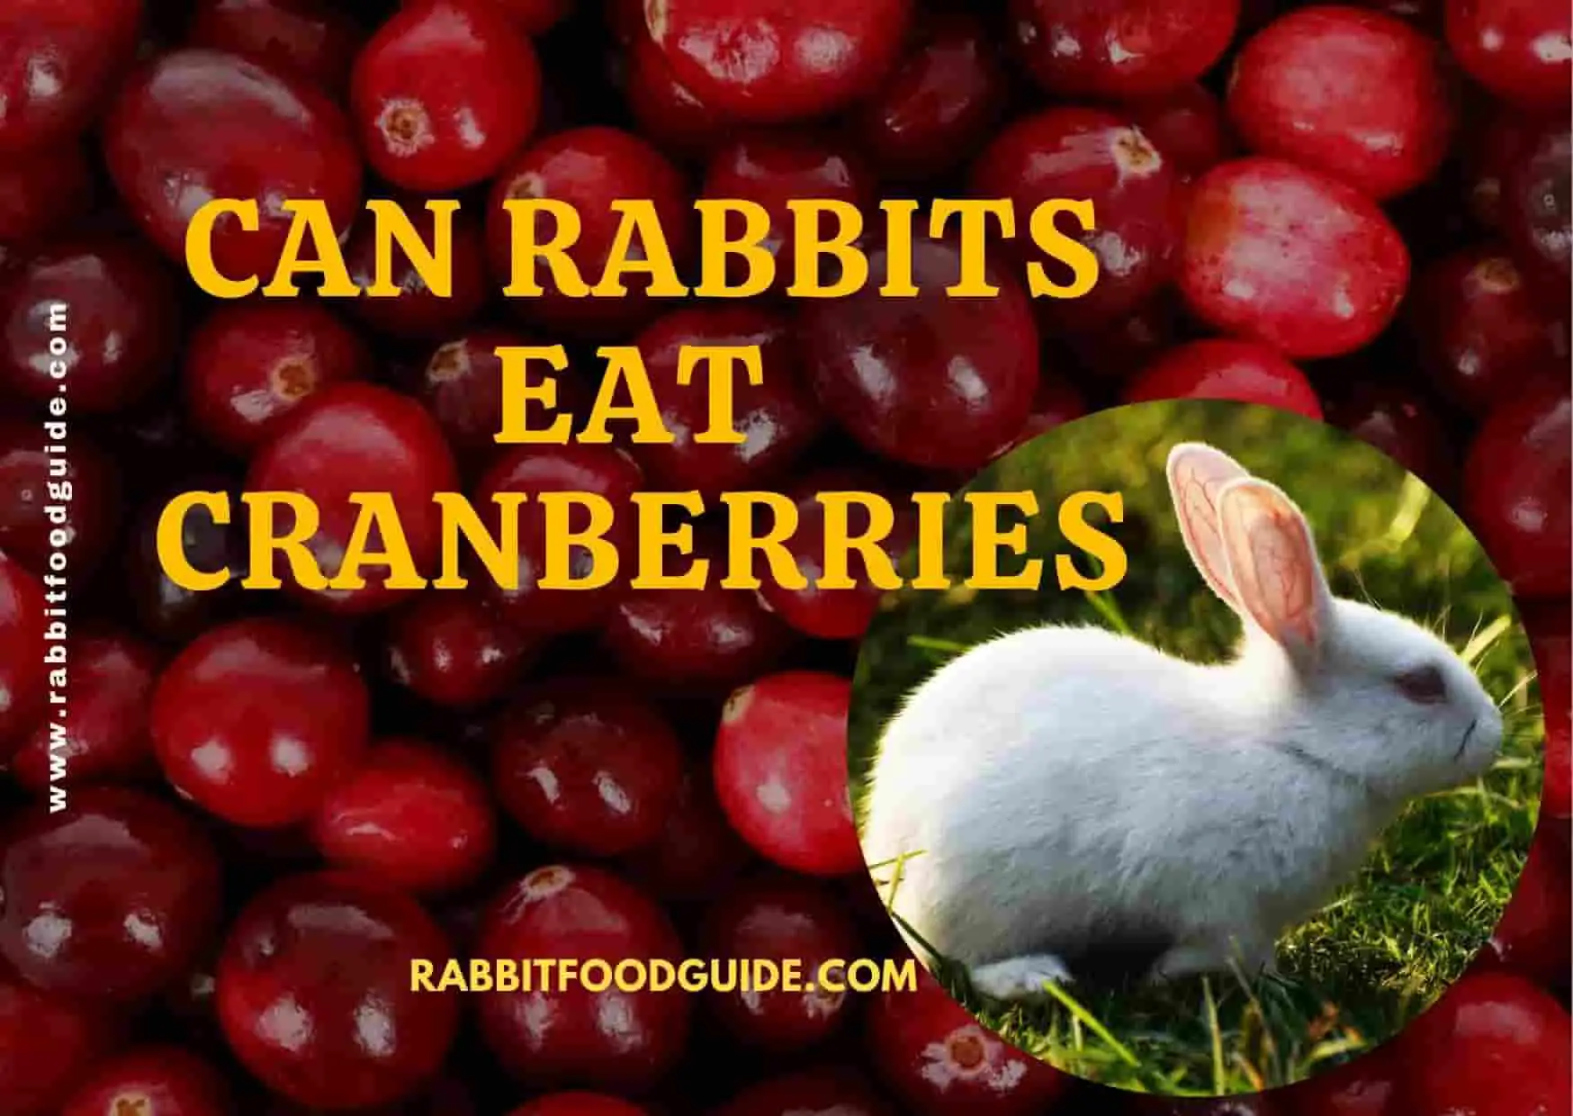 Can Rabbits Eat Cranberries? Best Guide We Should Know